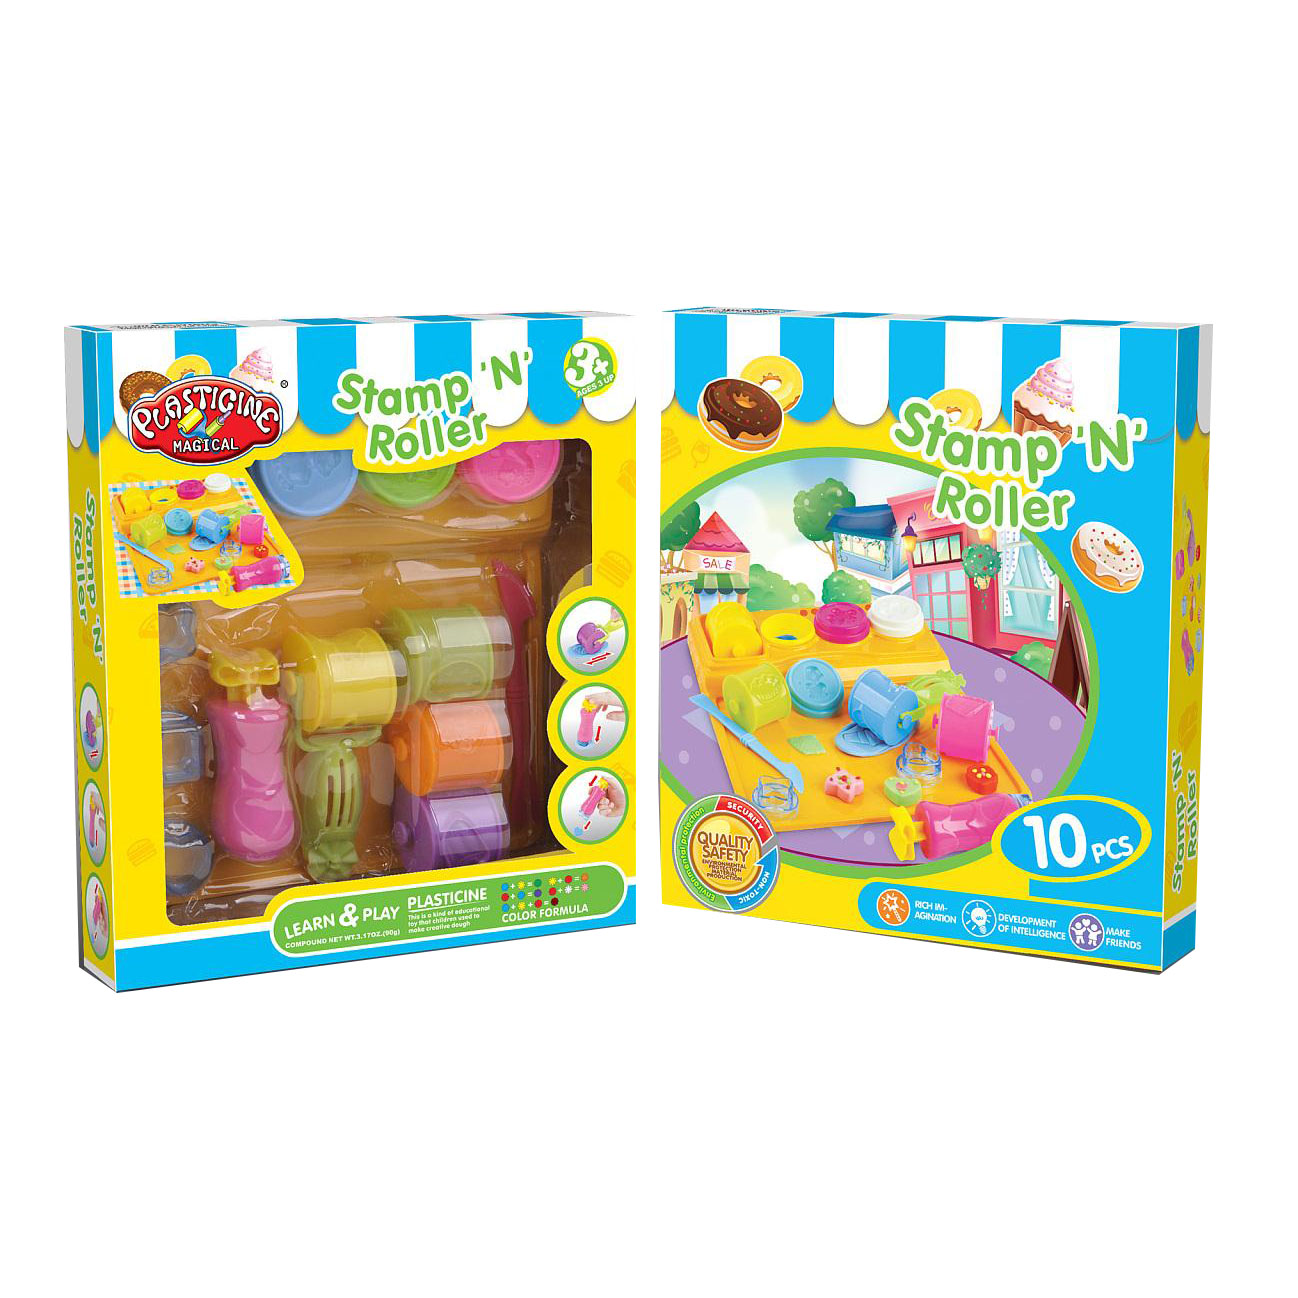 Colorful Corrugated Toys Packing Box with Clear Window